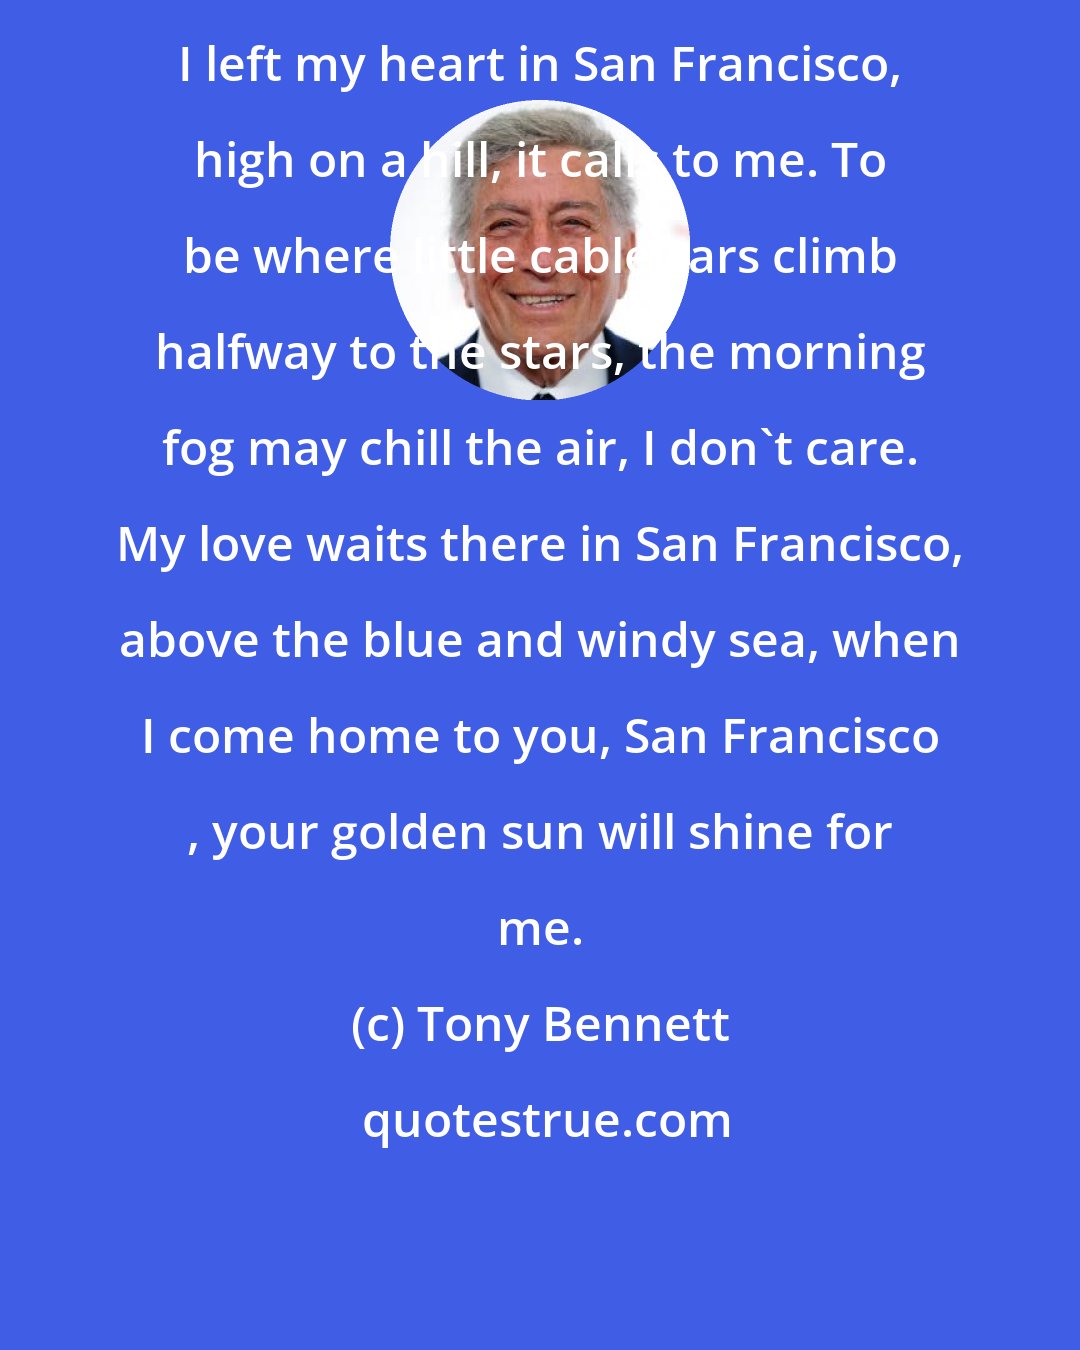 Tony Bennett: I left my heart in San Francisco, high on a hill, it calls to me. To be where little cable cars climb halfway to the stars, the morning fog may chill the air, I don't care. My love waits there in San Francisco, above the blue and windy sea, when I come home to you, San Francisco , your golden sun will shine for me.